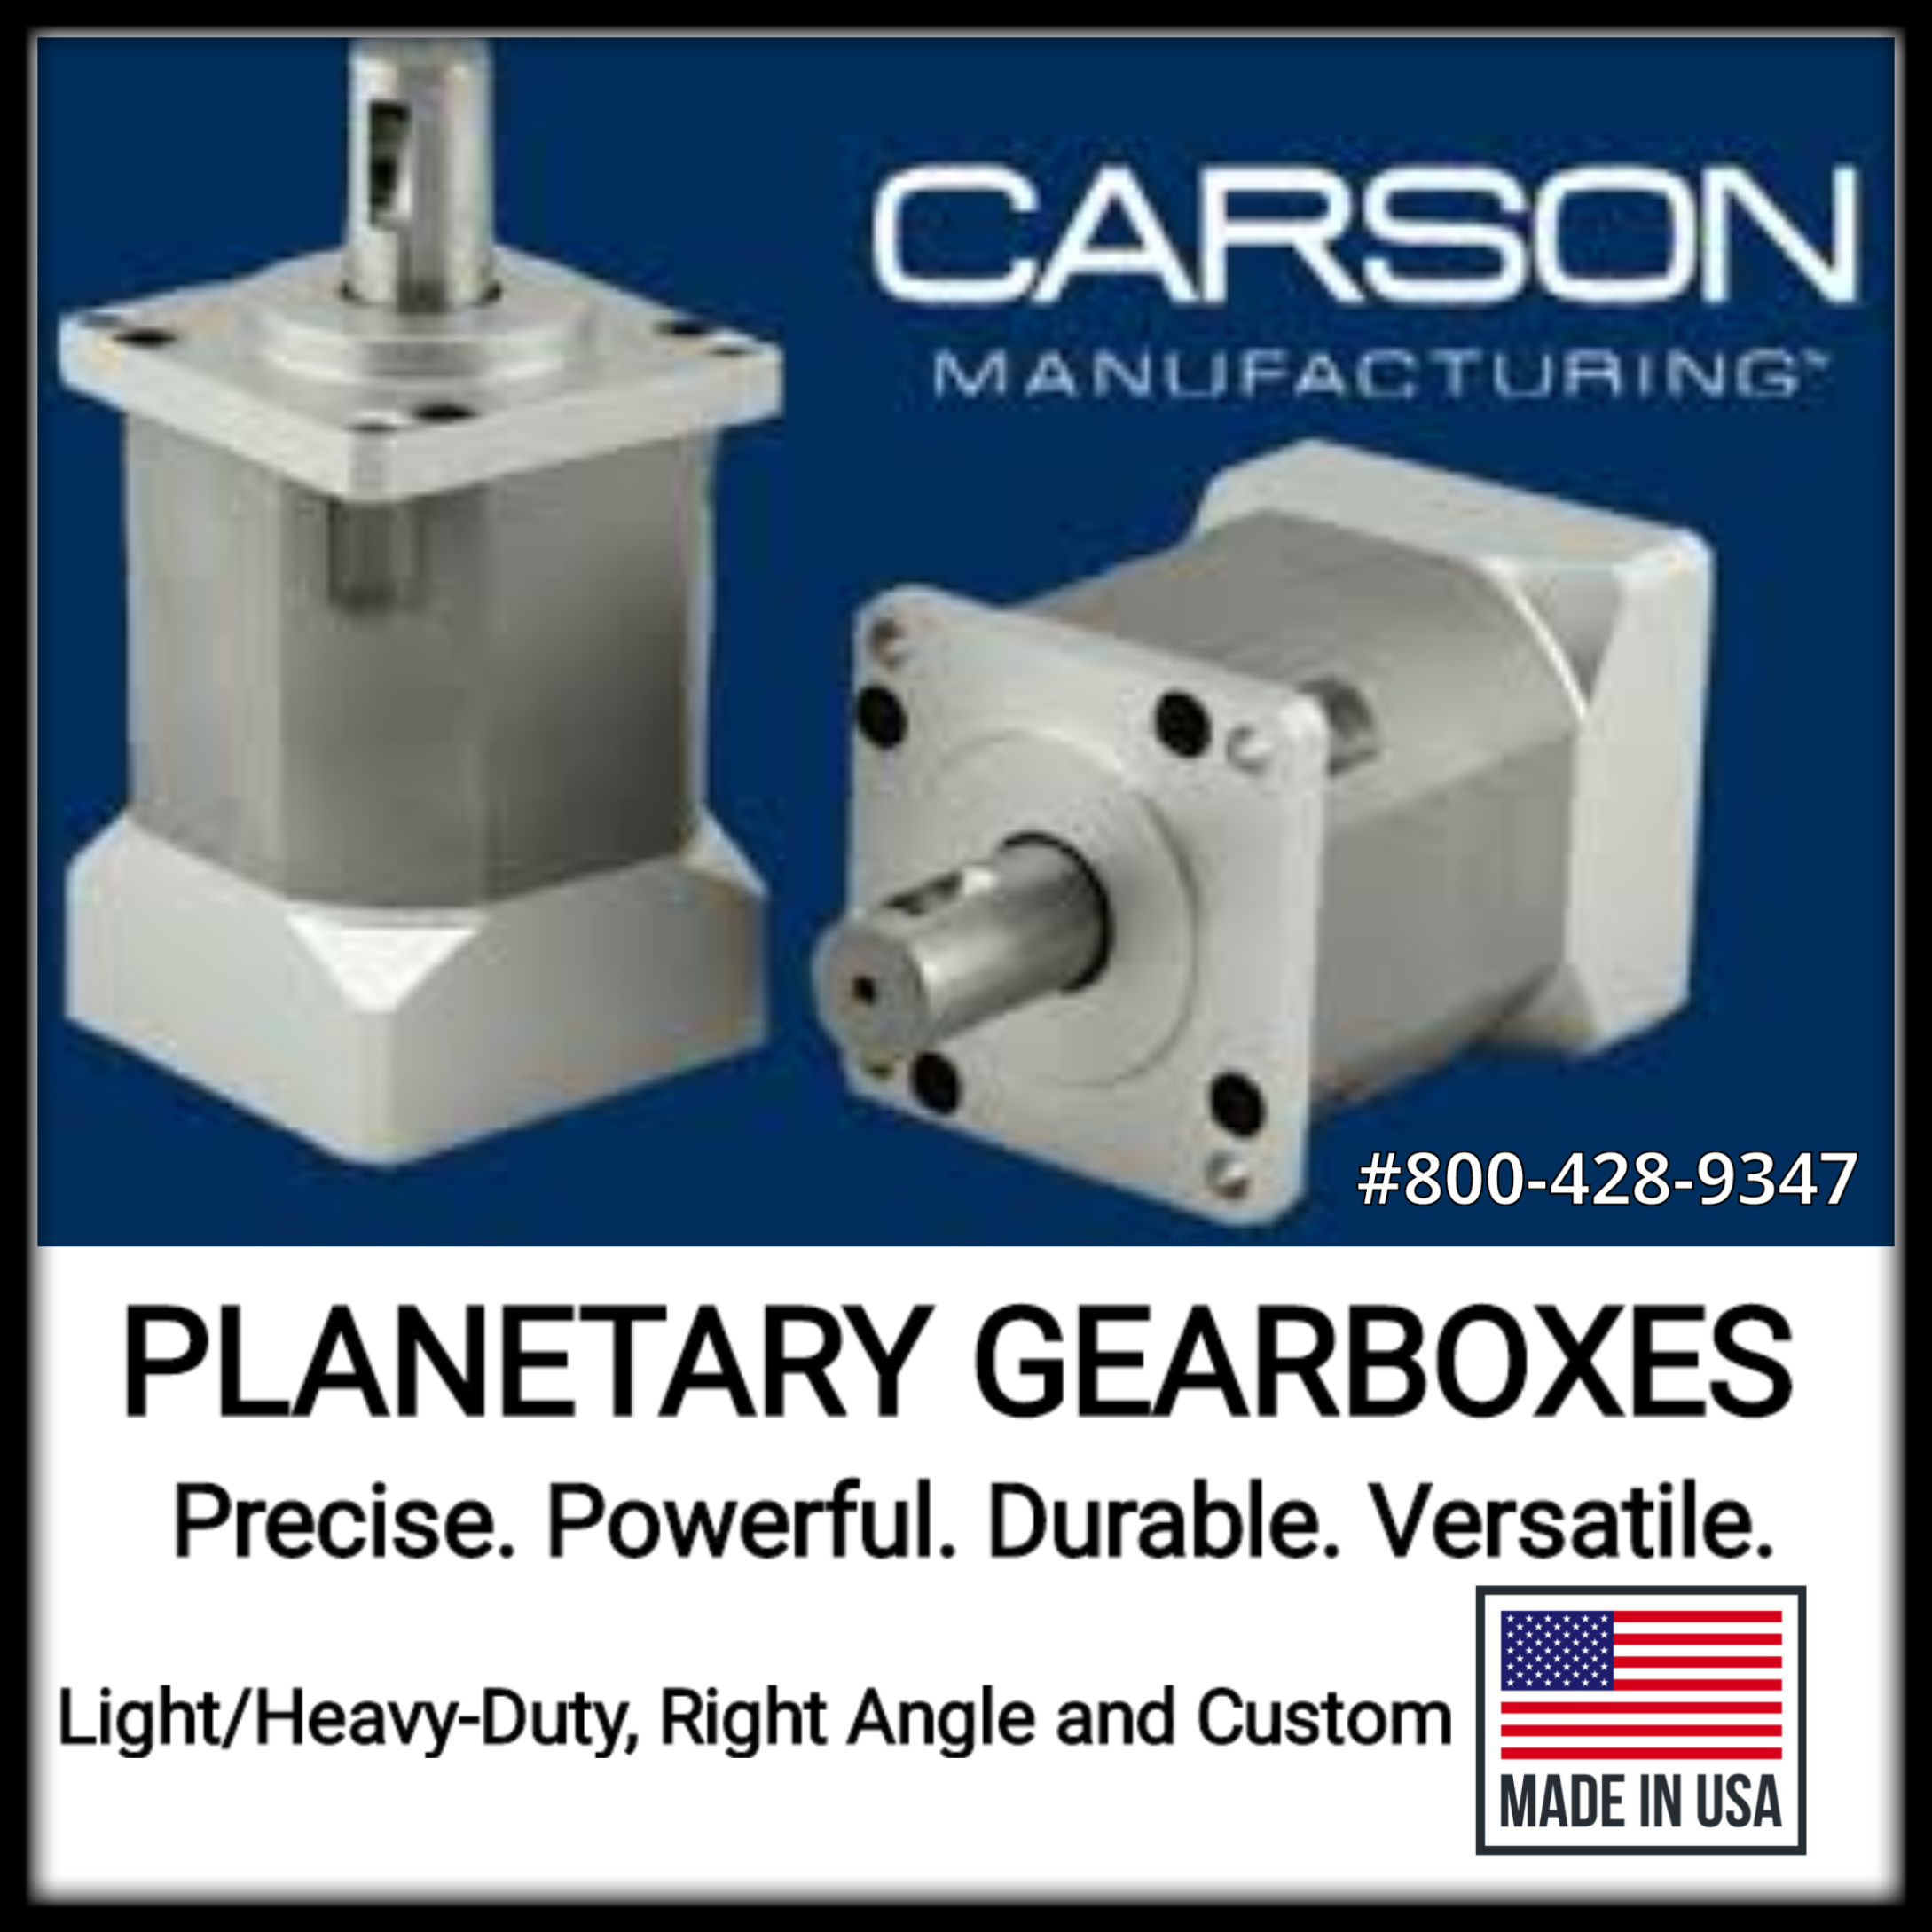 Carson Planetary Gearboxes